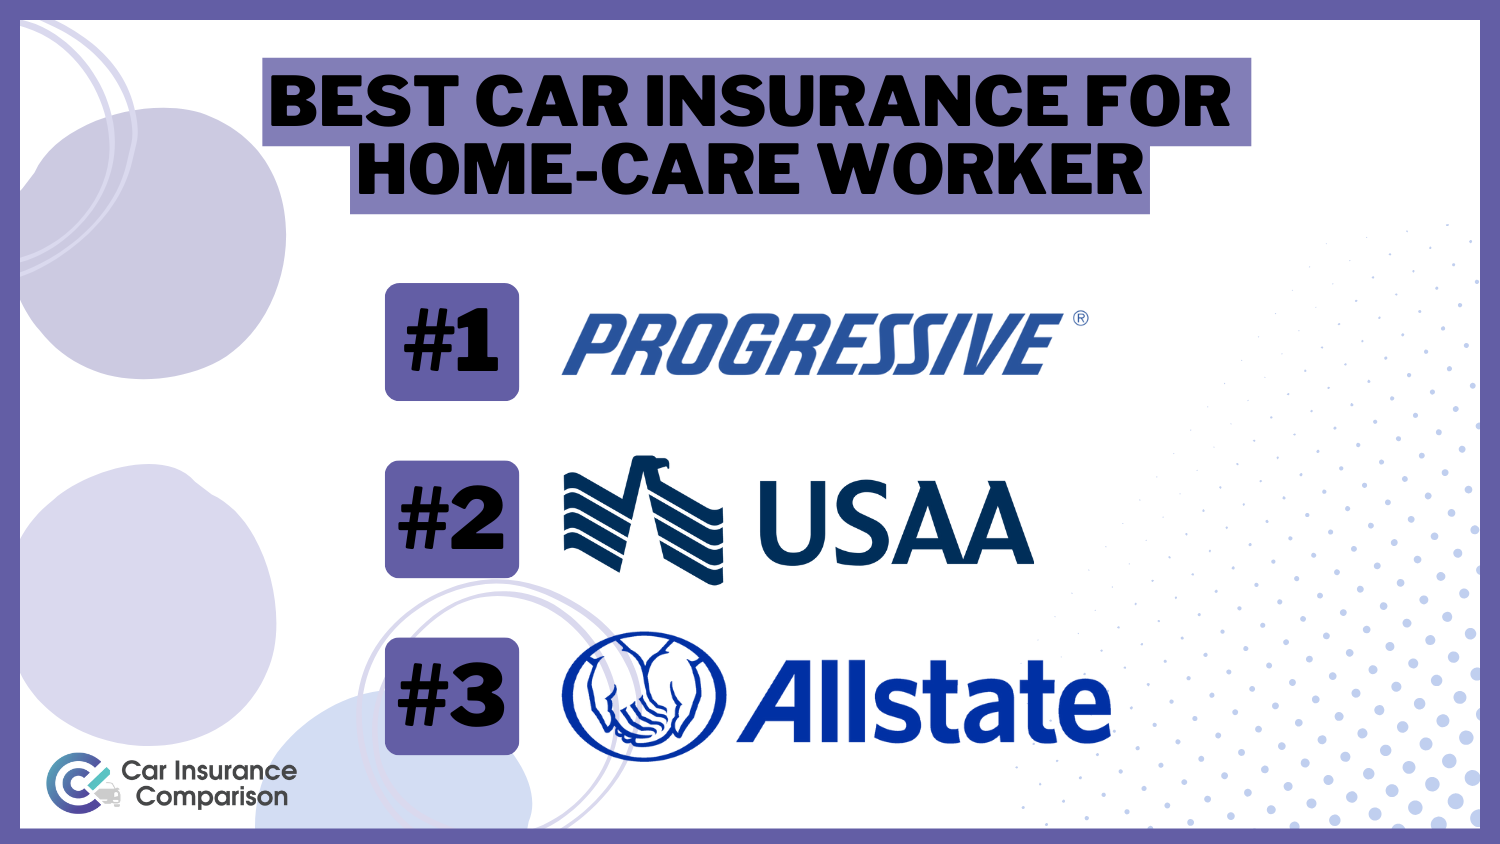 Best Car Insurance for Home-Care Worker: Progressive, USAA, and Allstate